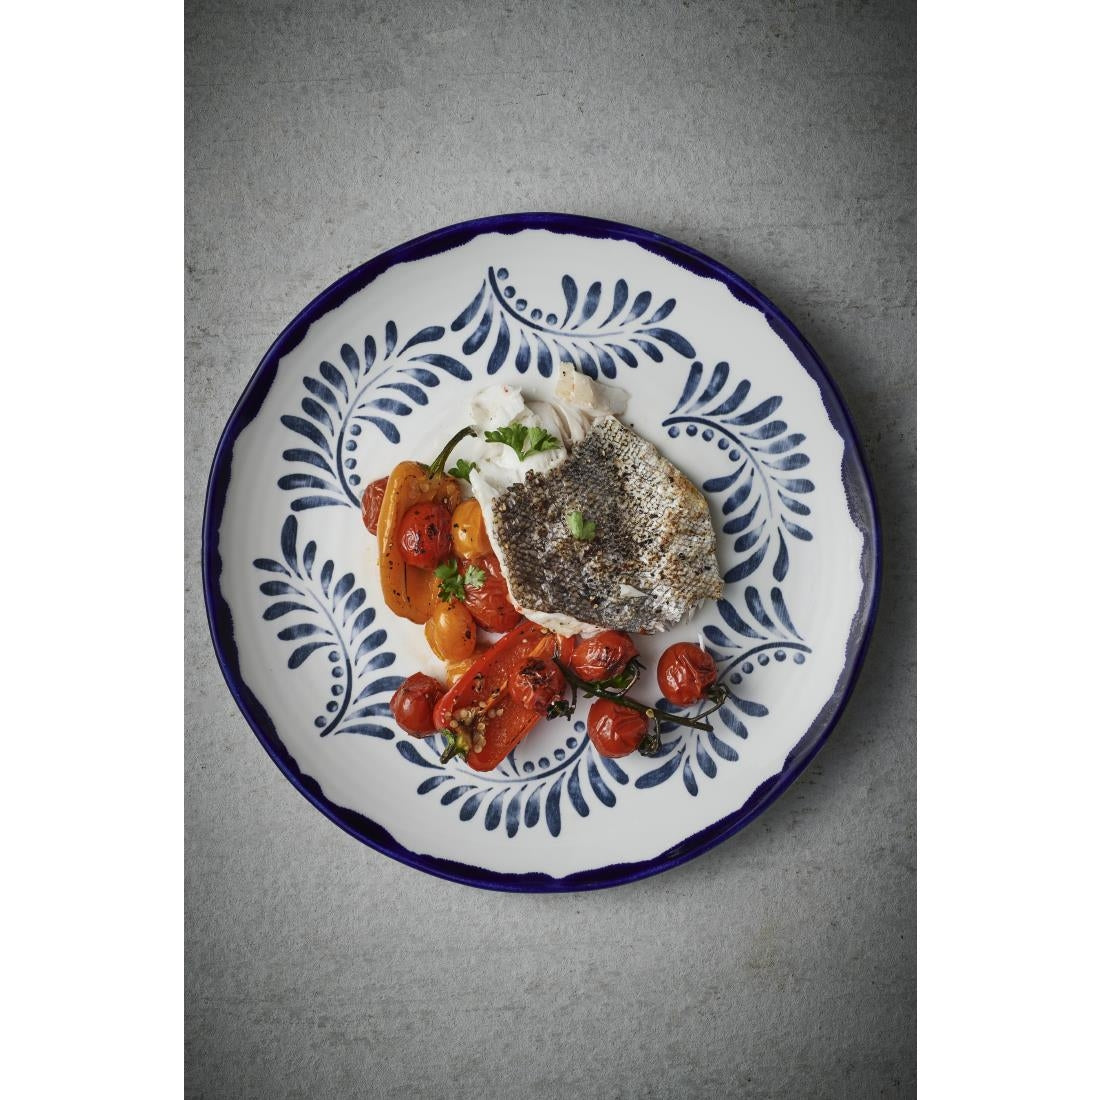 CU038 Dudson Harvest Mediterranean Organic Coupe Plate 11.4 inch Box 12 JD Catering Equipment Solutions Ltd